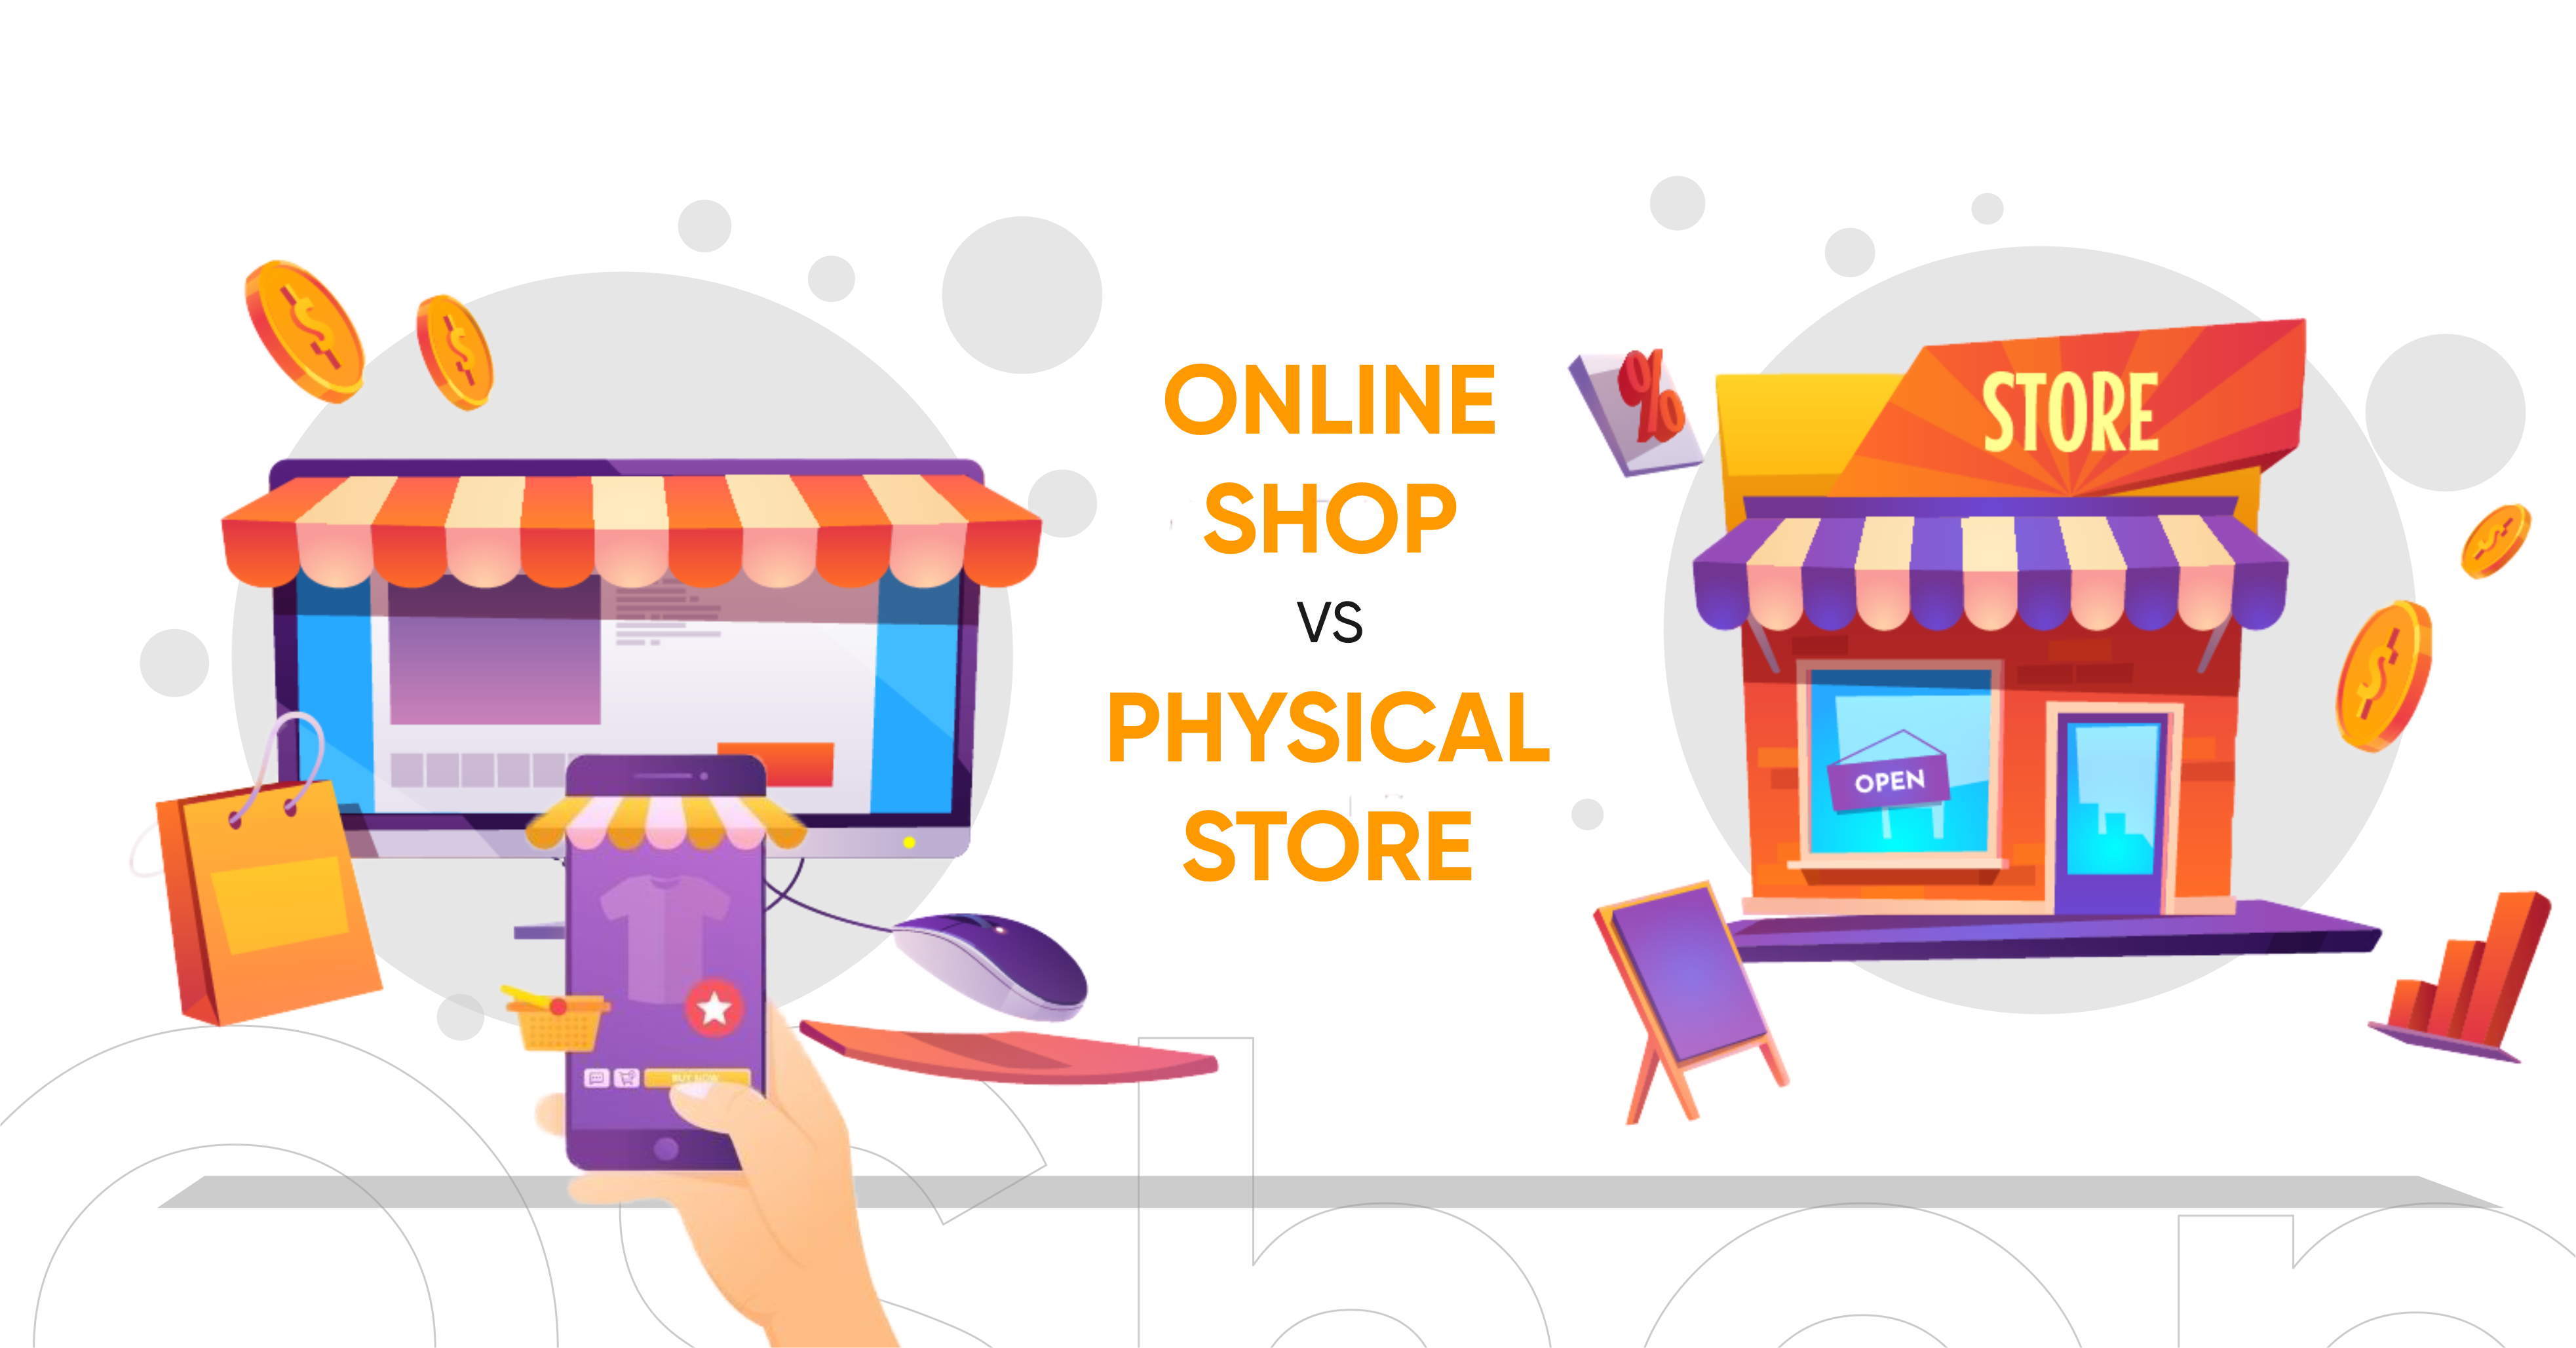 Why an online store is better than a physical store